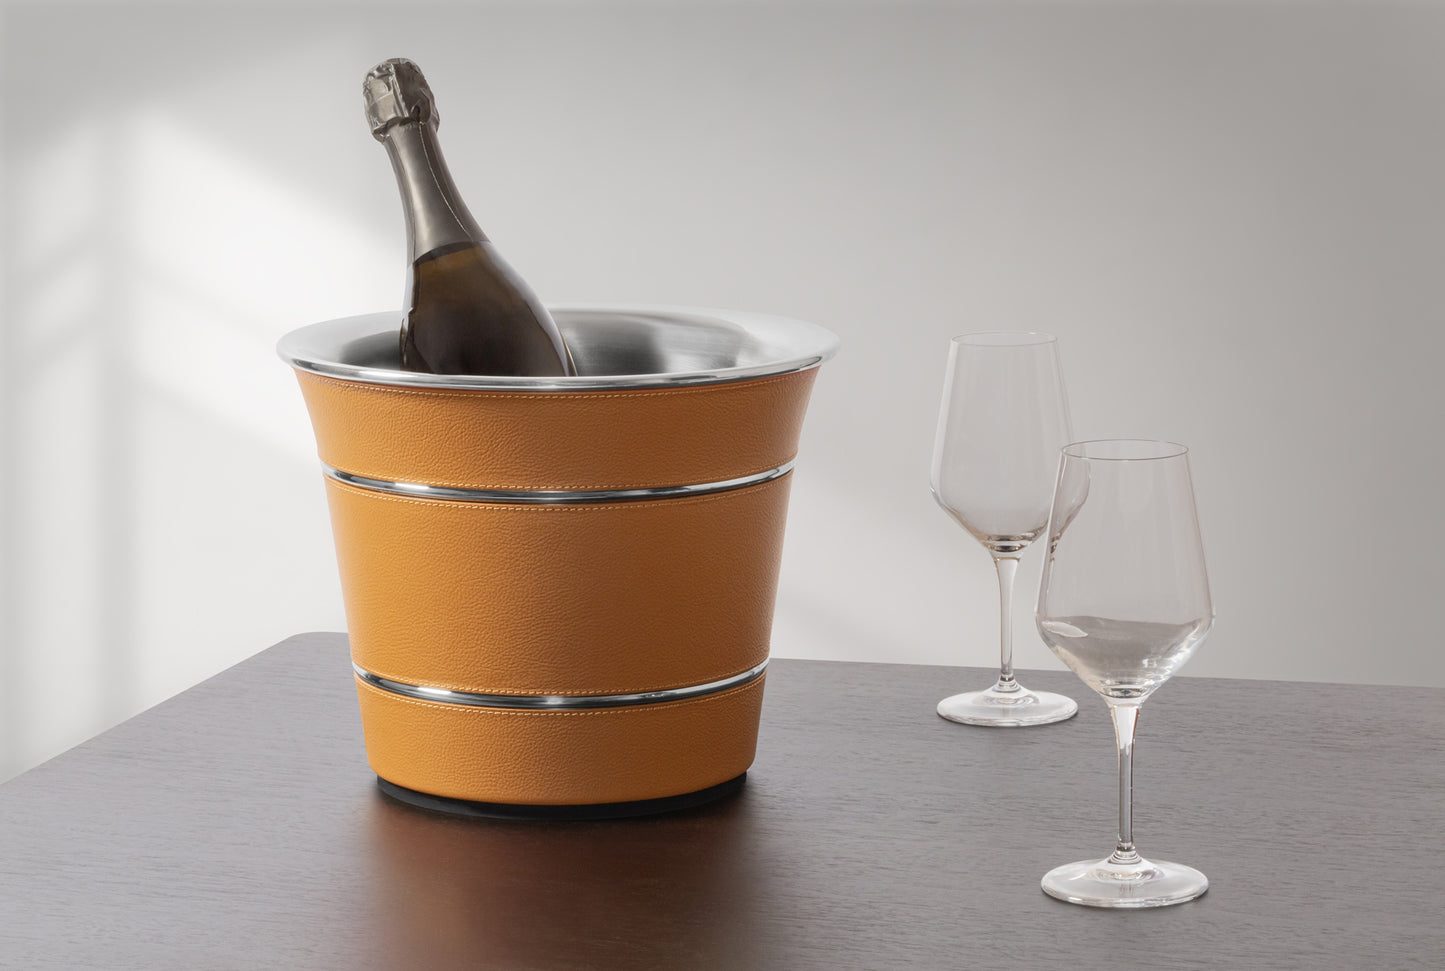 Giobagnara x Poltrona Frau Leather Champagne Bucket | Insulated Double-Chamber Polished Steel Structure | Elegant Leather Detailing | Sturdy and Stylish Design | Made in Pelle Frau® Leather | Elevate Your Champagne Experience at 2Jour Concierge, #1 luxury high-end gift & lifestyle shop